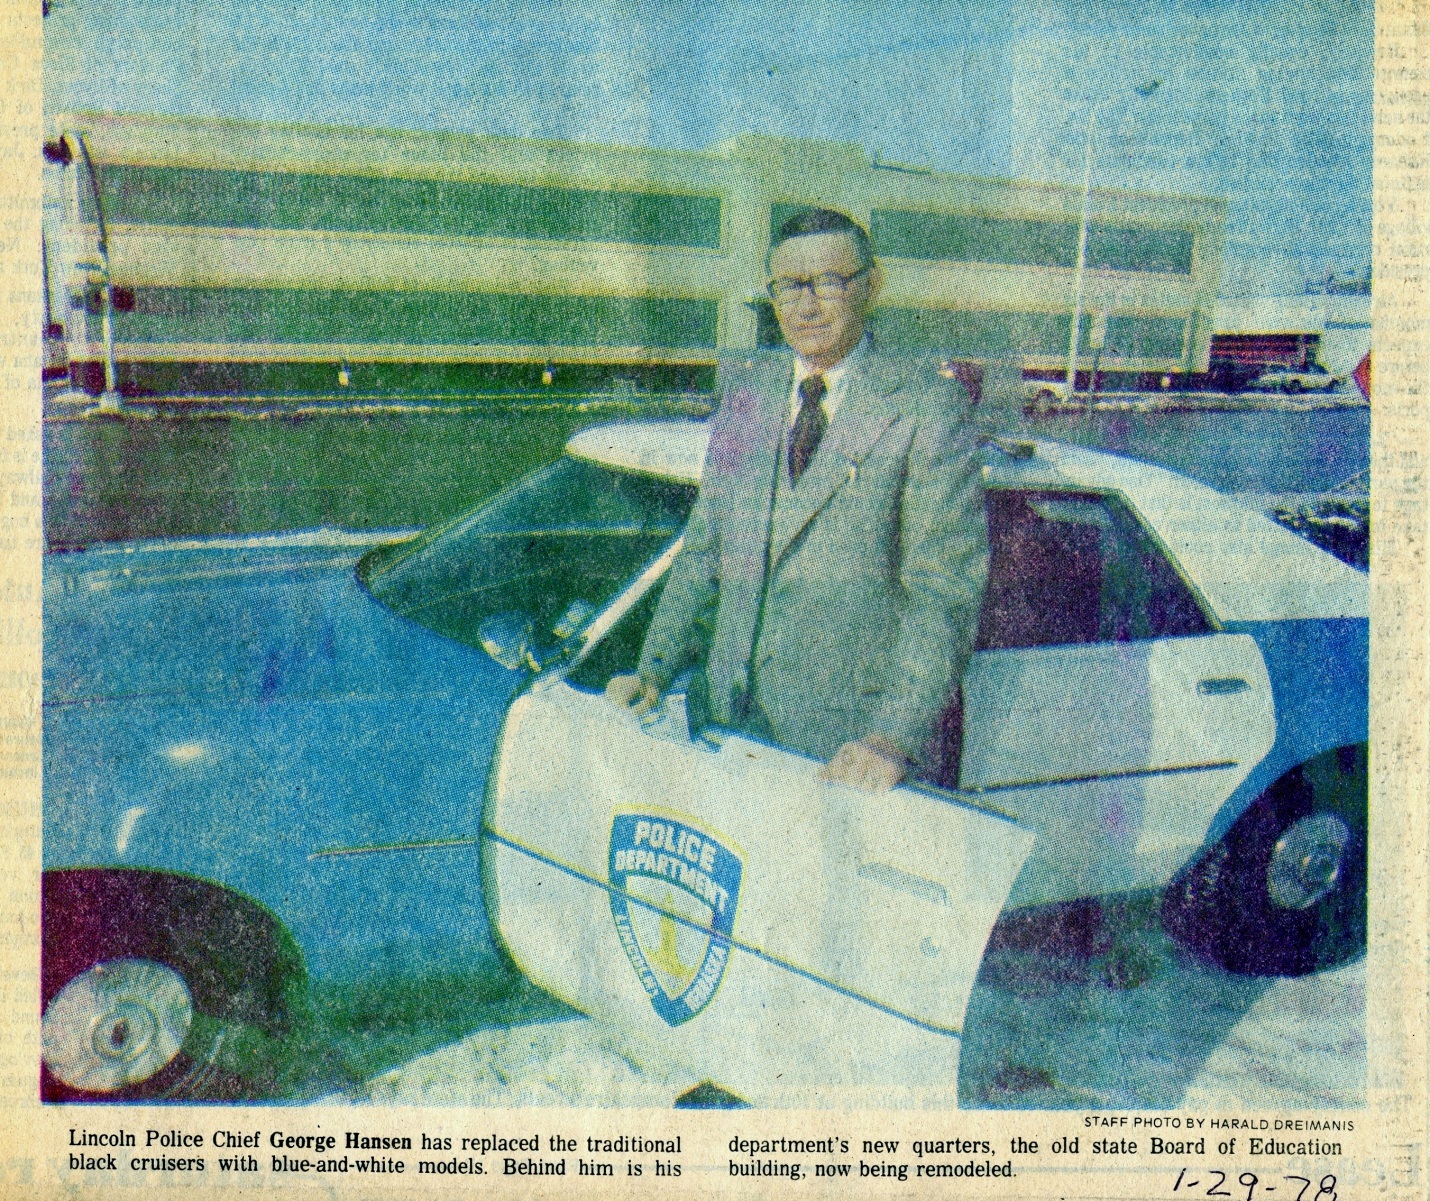 Chief George Hansen standing in front of a Police cruiser